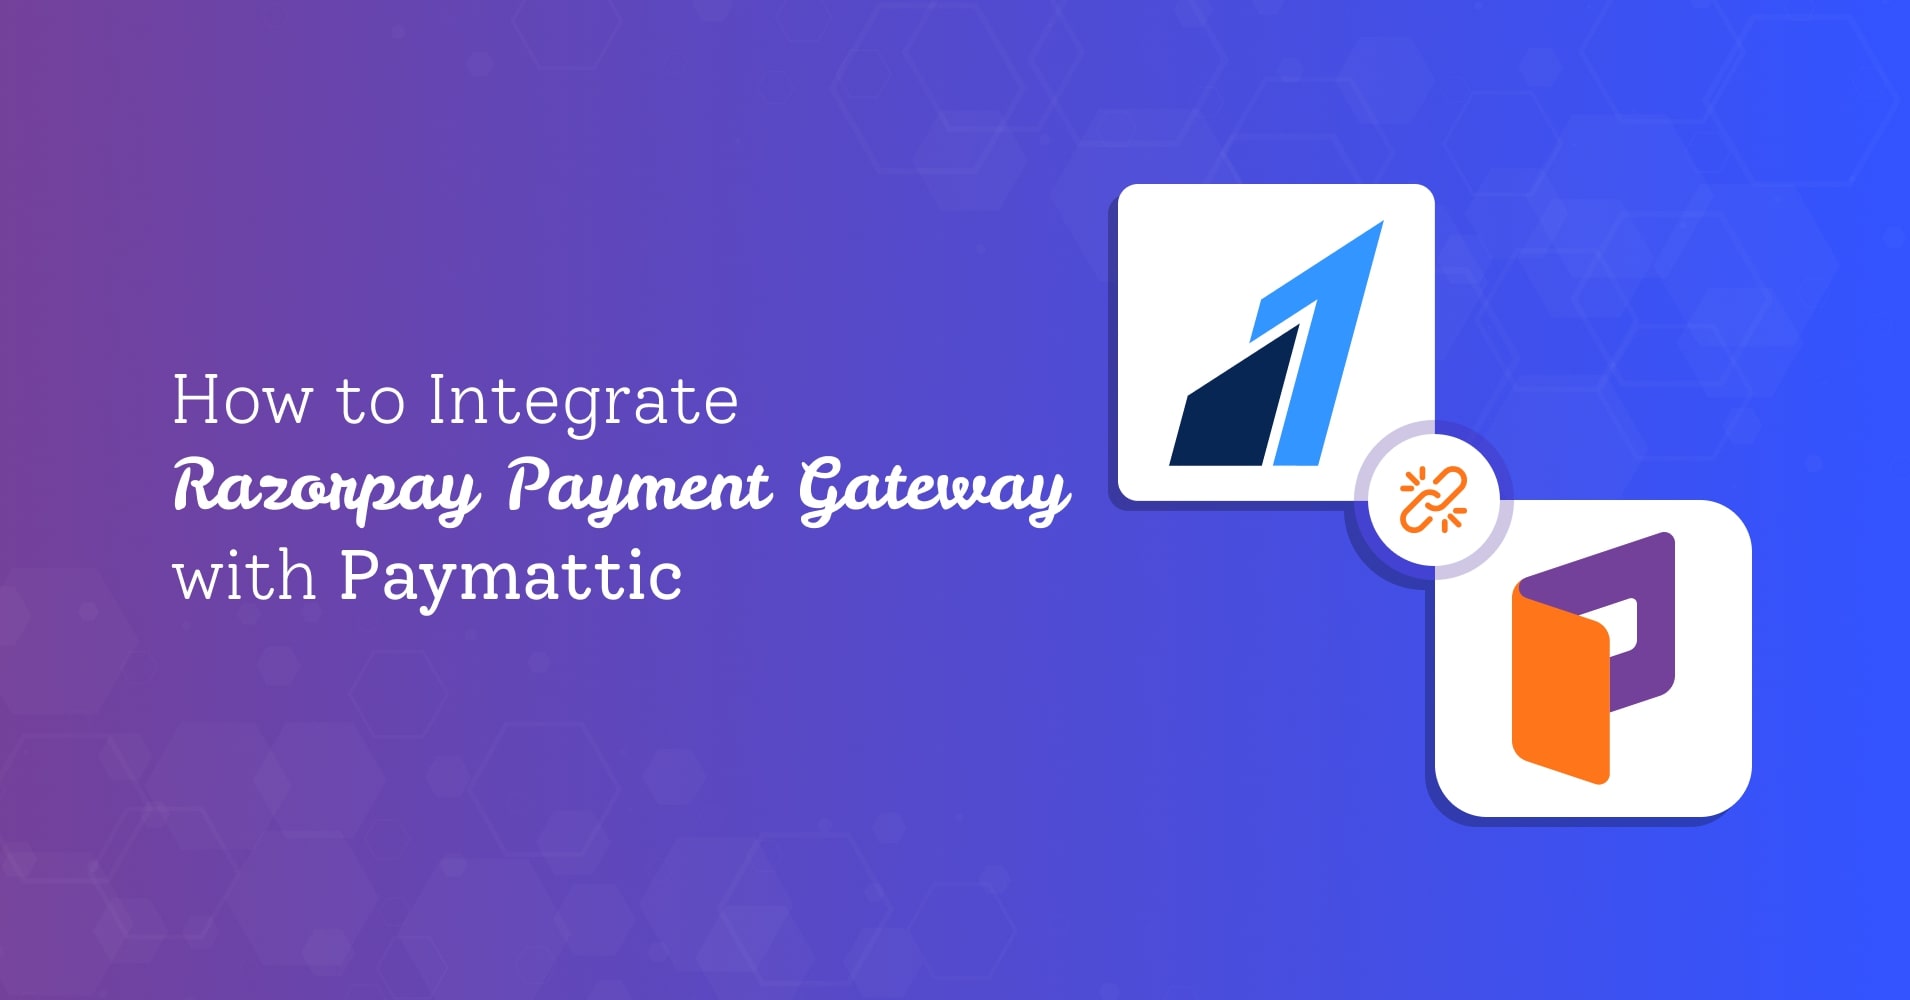 How to Integrate Razorpay Payment Gateway with Paymattic in WordPress